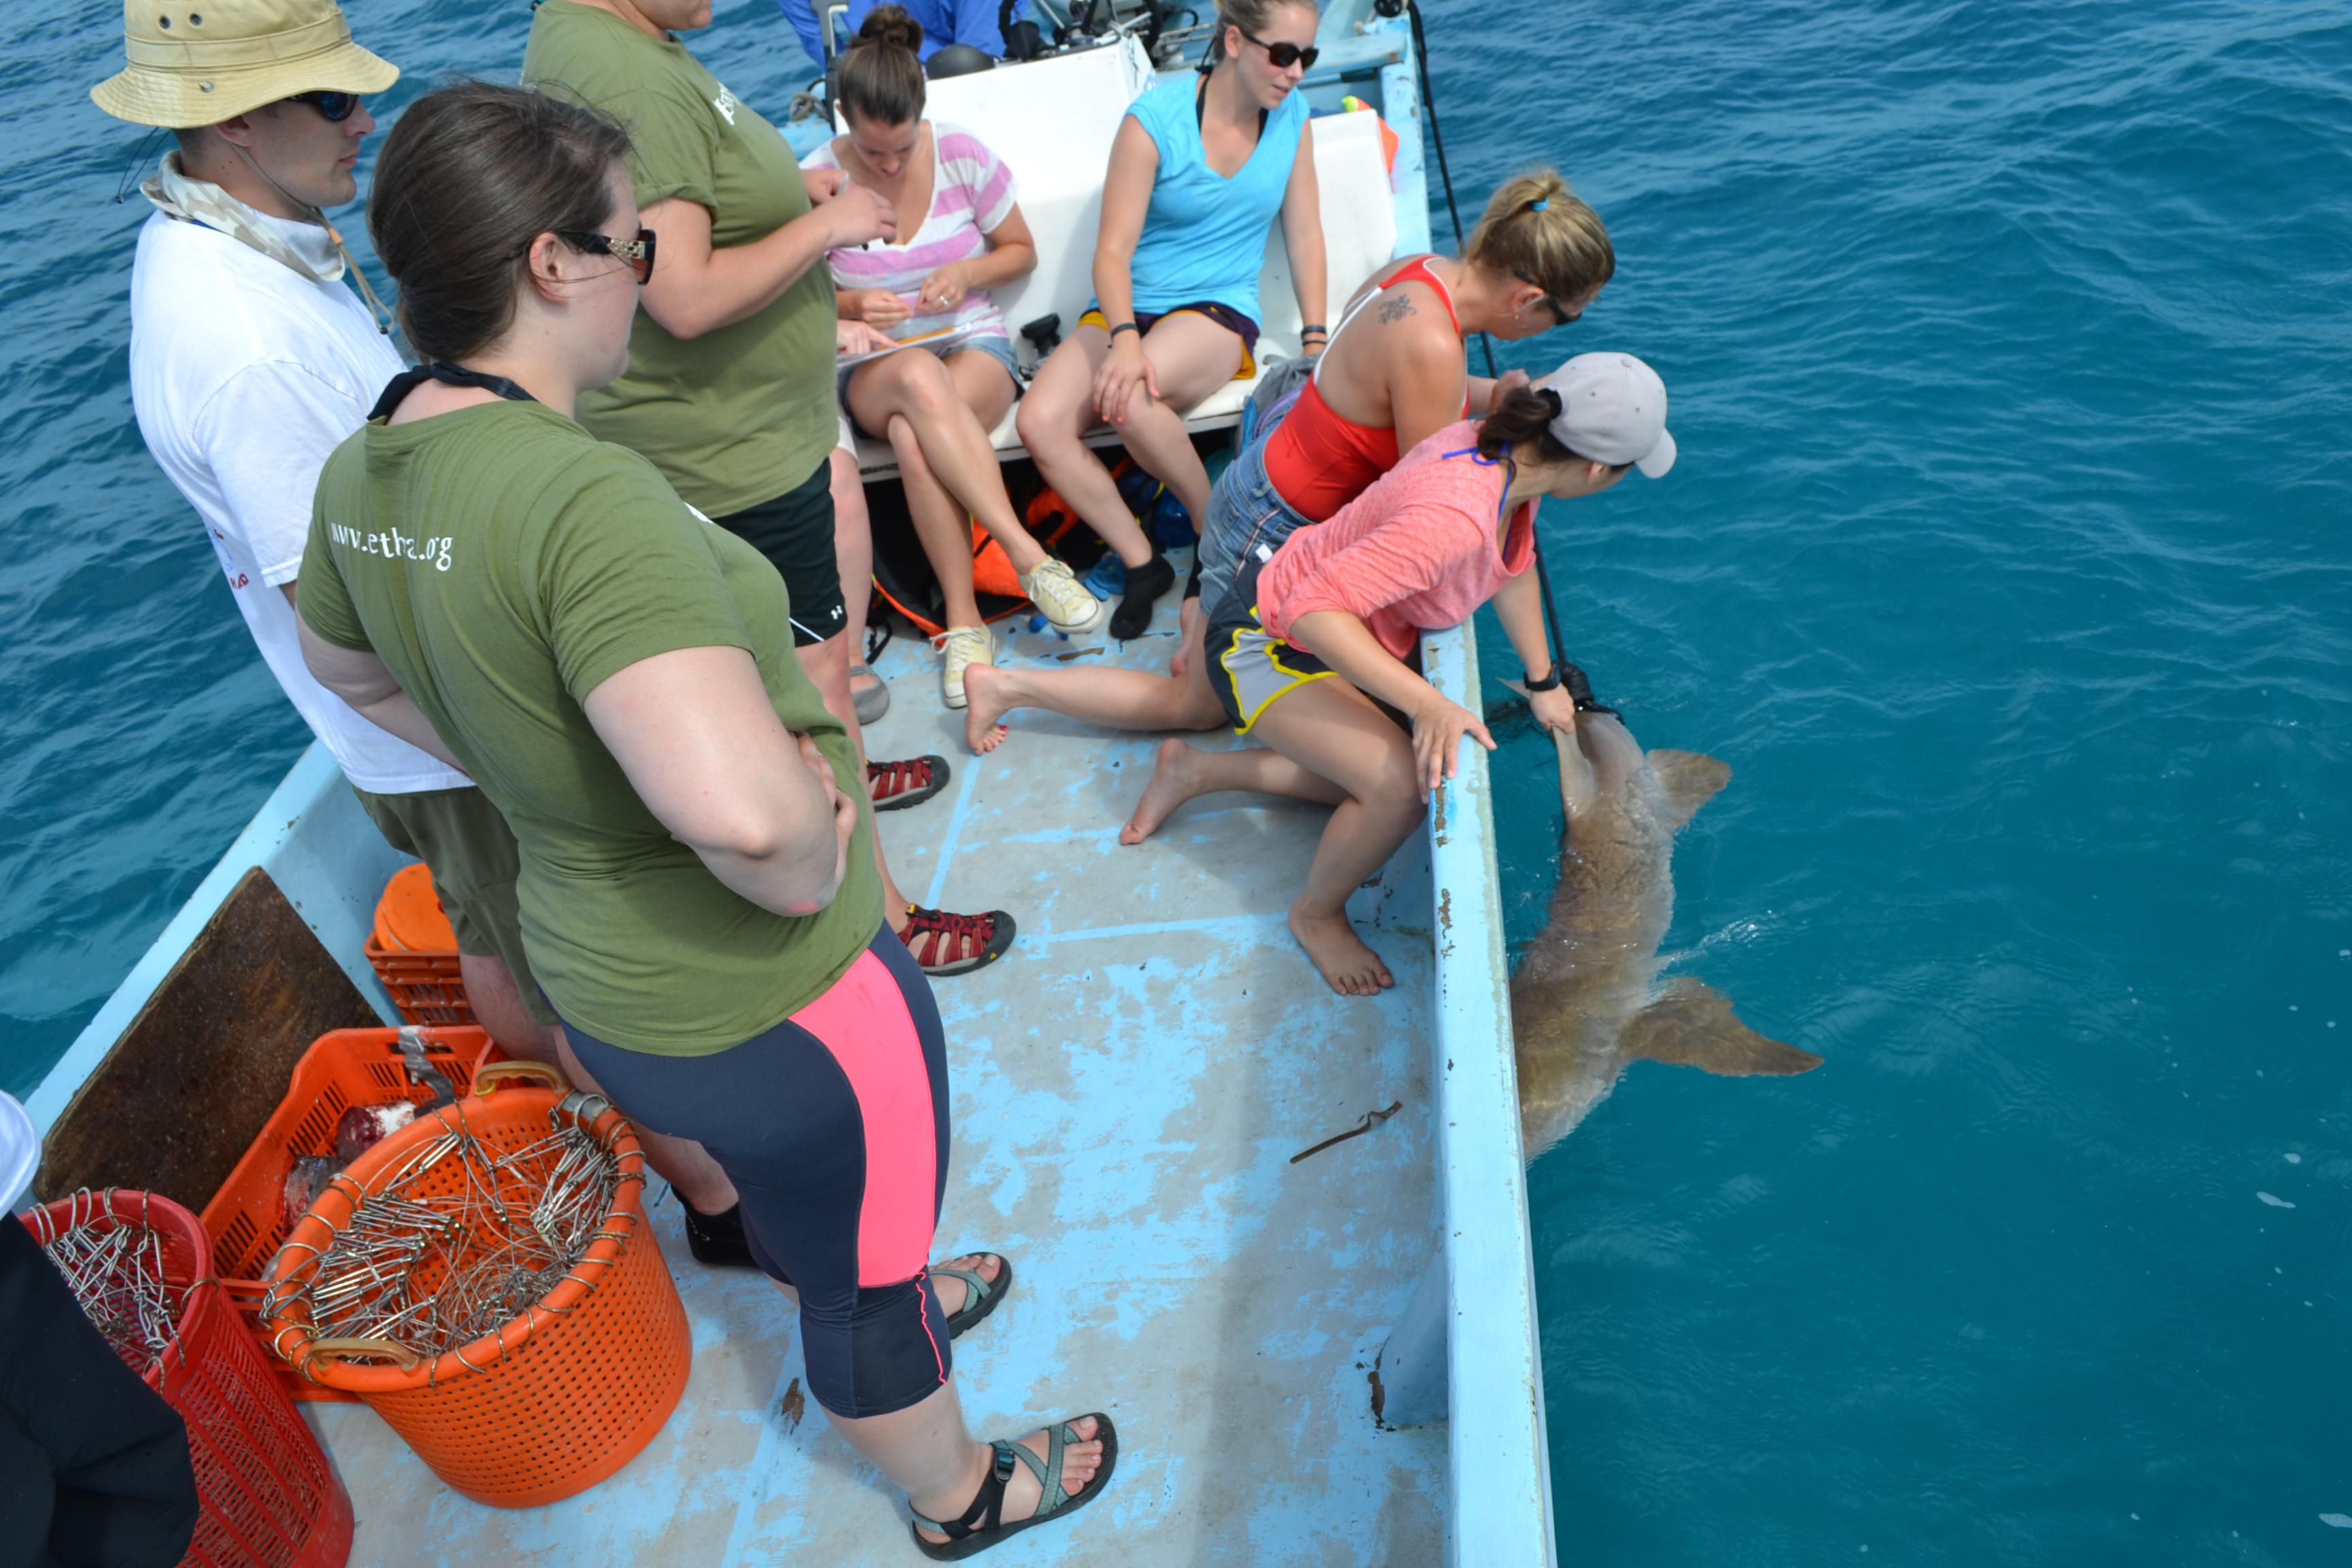 Teen Earthwatch volunteers helping to catch and tag sharks.